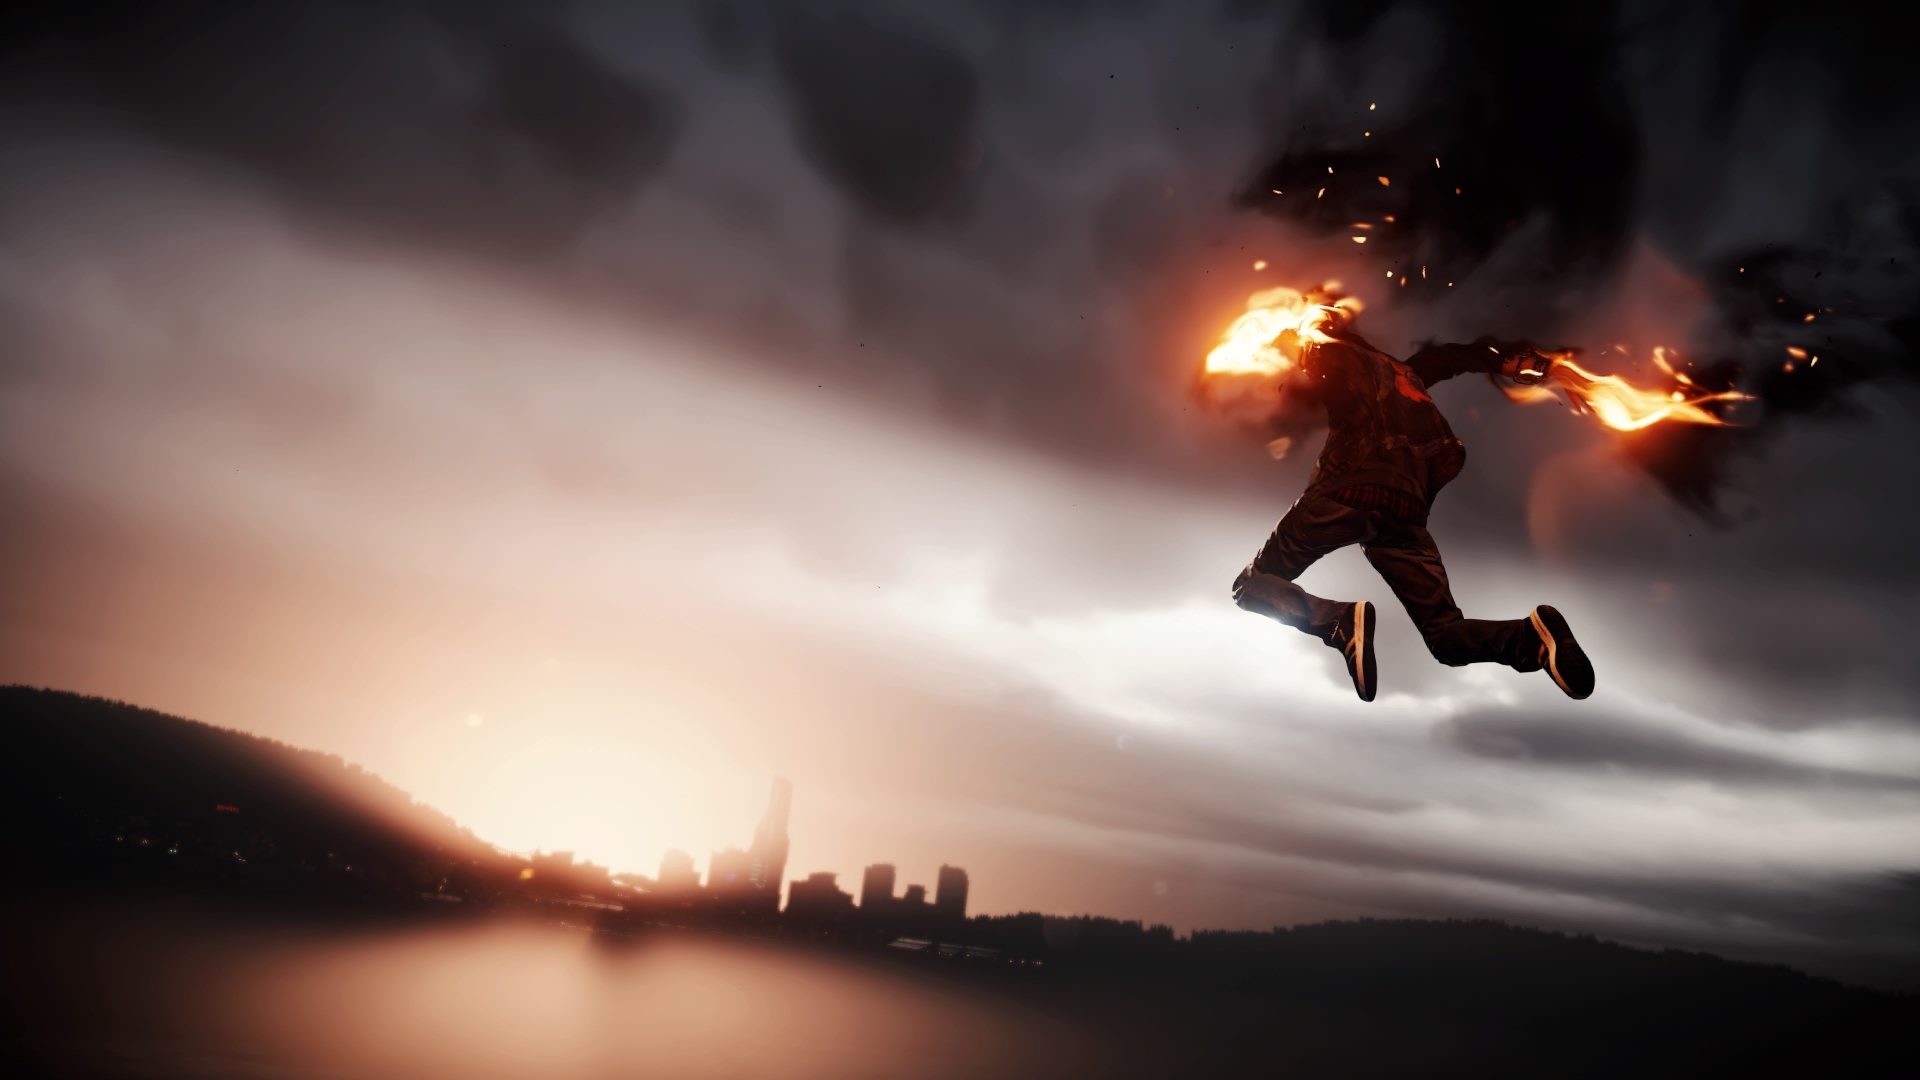 Wallpaper id infamous second son fire superhero video games infamous free download